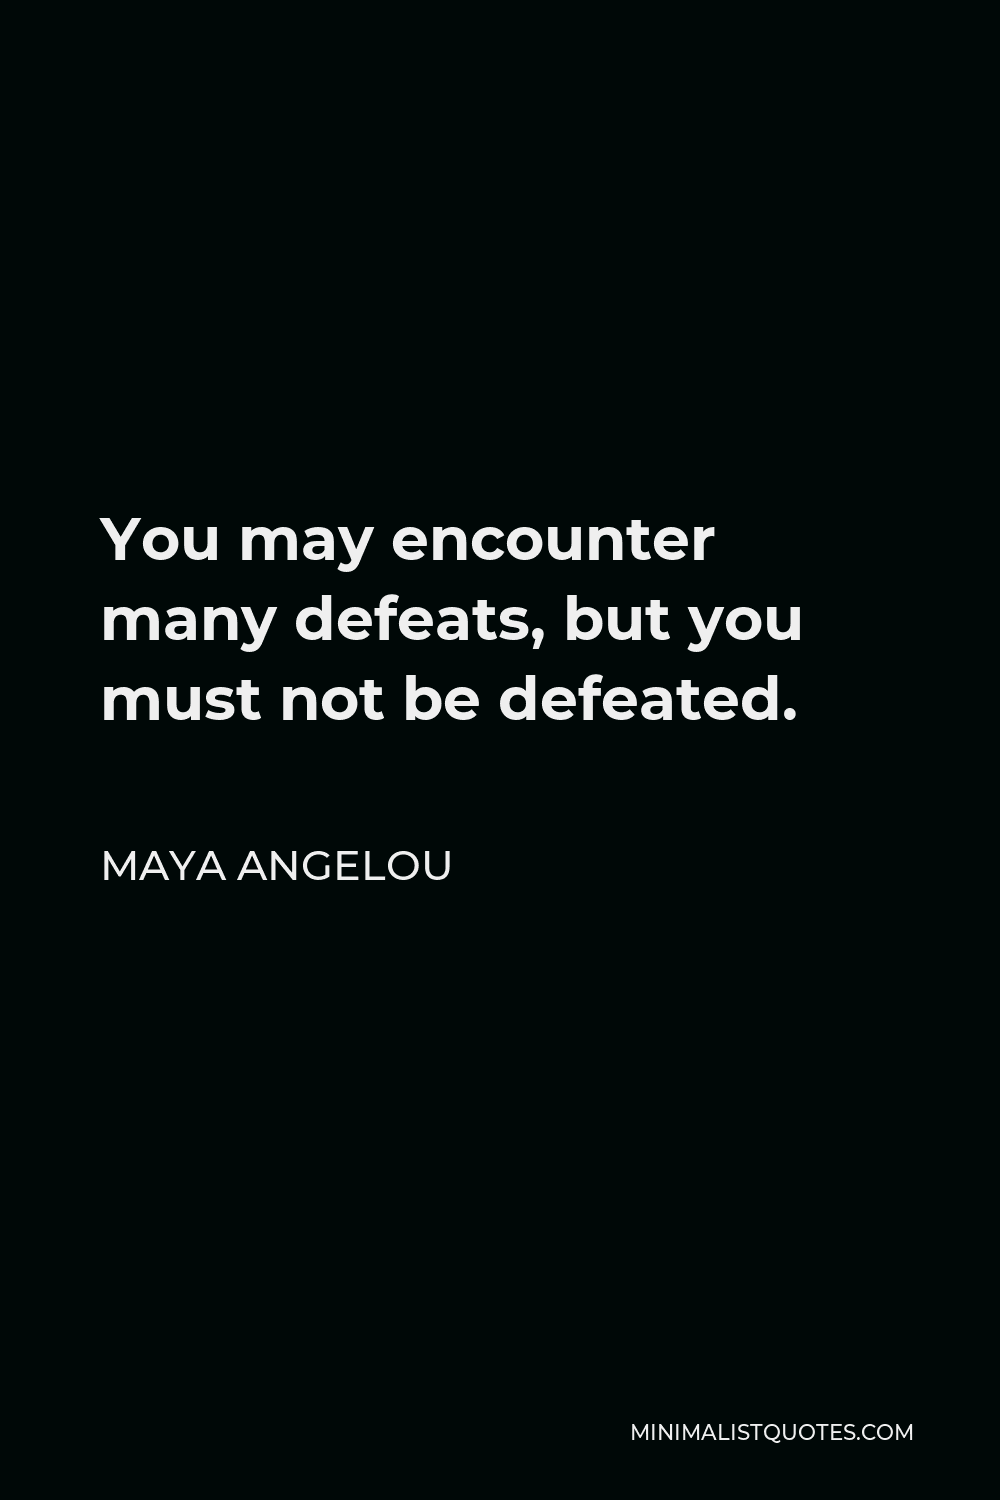 Maya Angelou Quote - You may encounter many defeats, but you must not be defeated.